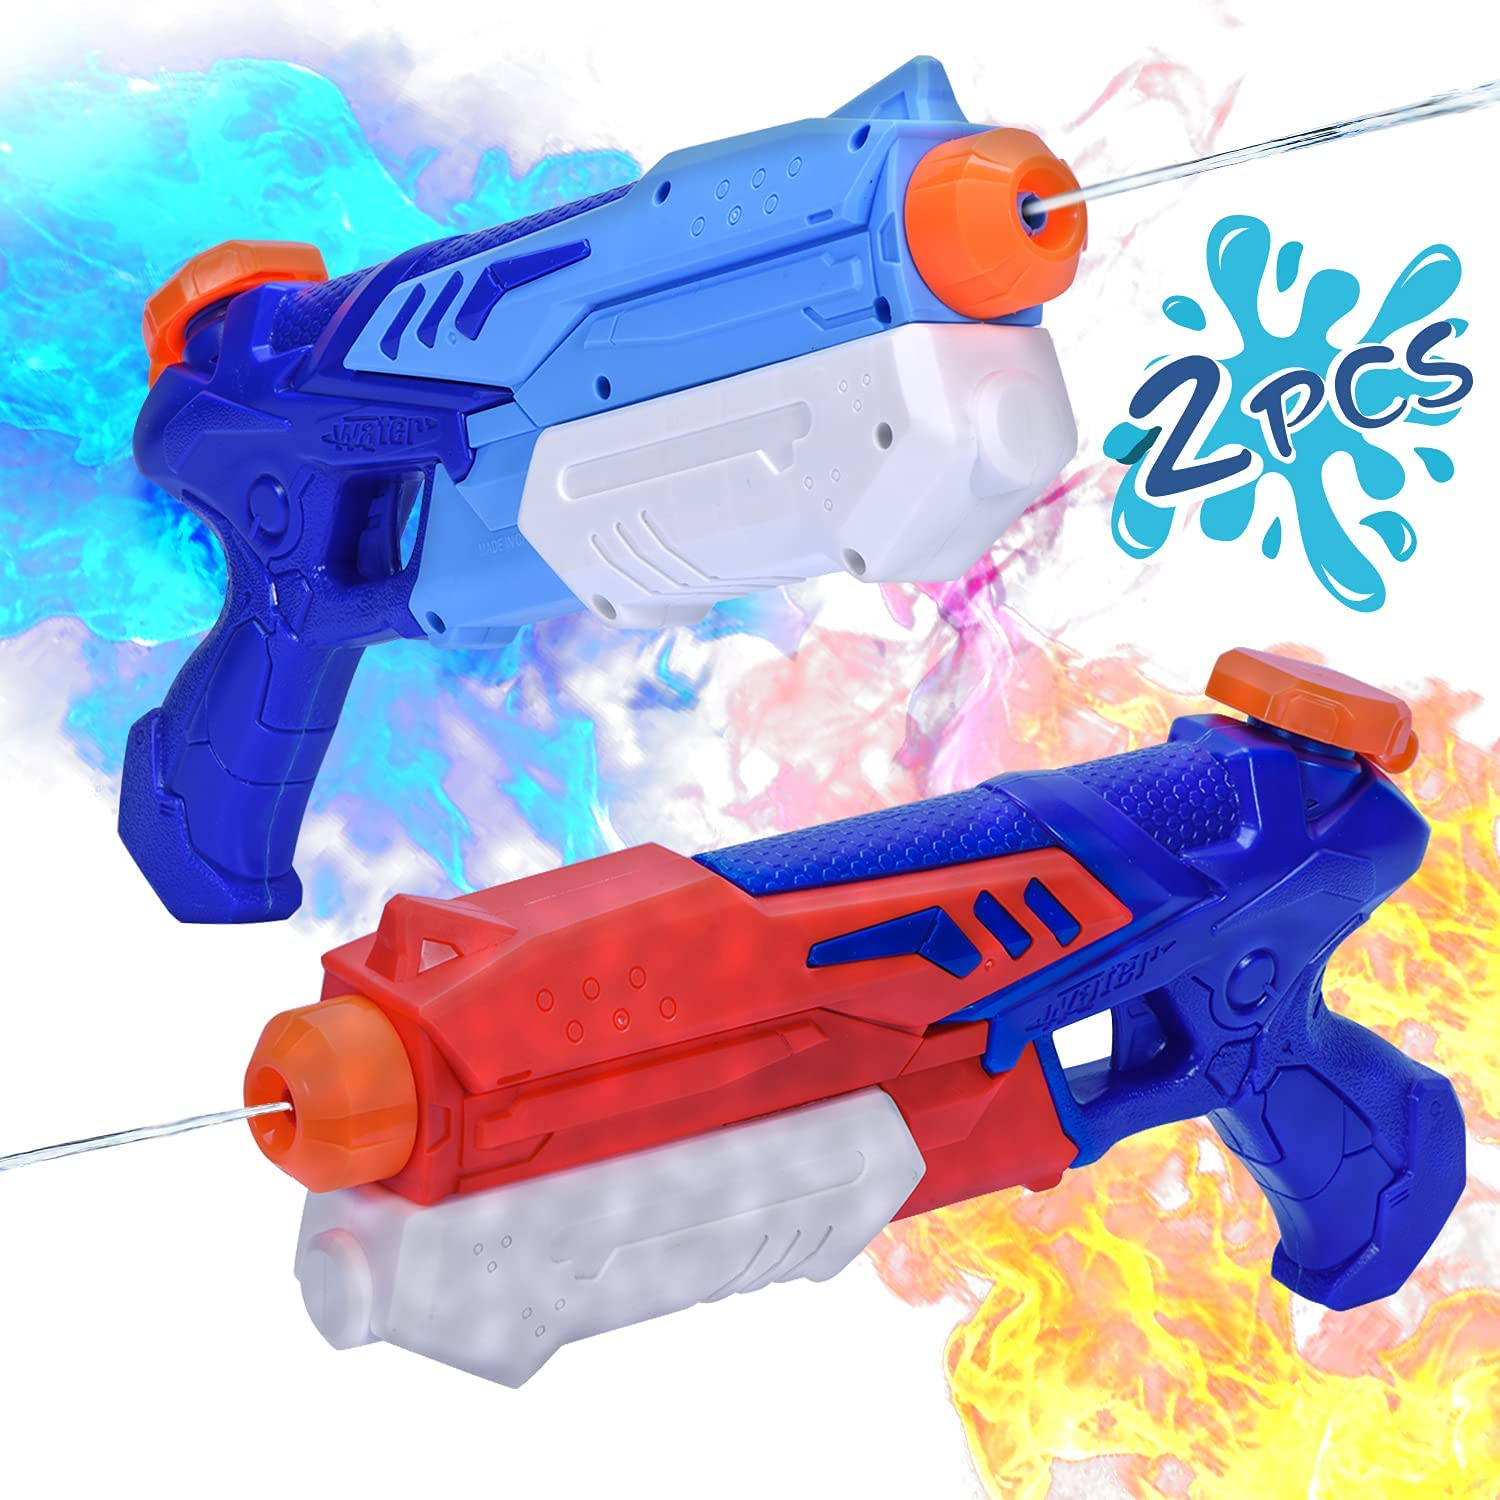 Squirt Guns for Kid, 2 Pcs Water Pistol, Water Guns 400ML Blaster for Summer Outdoor Pool Beach Water Toys for Kid and Adults - Blue/Red